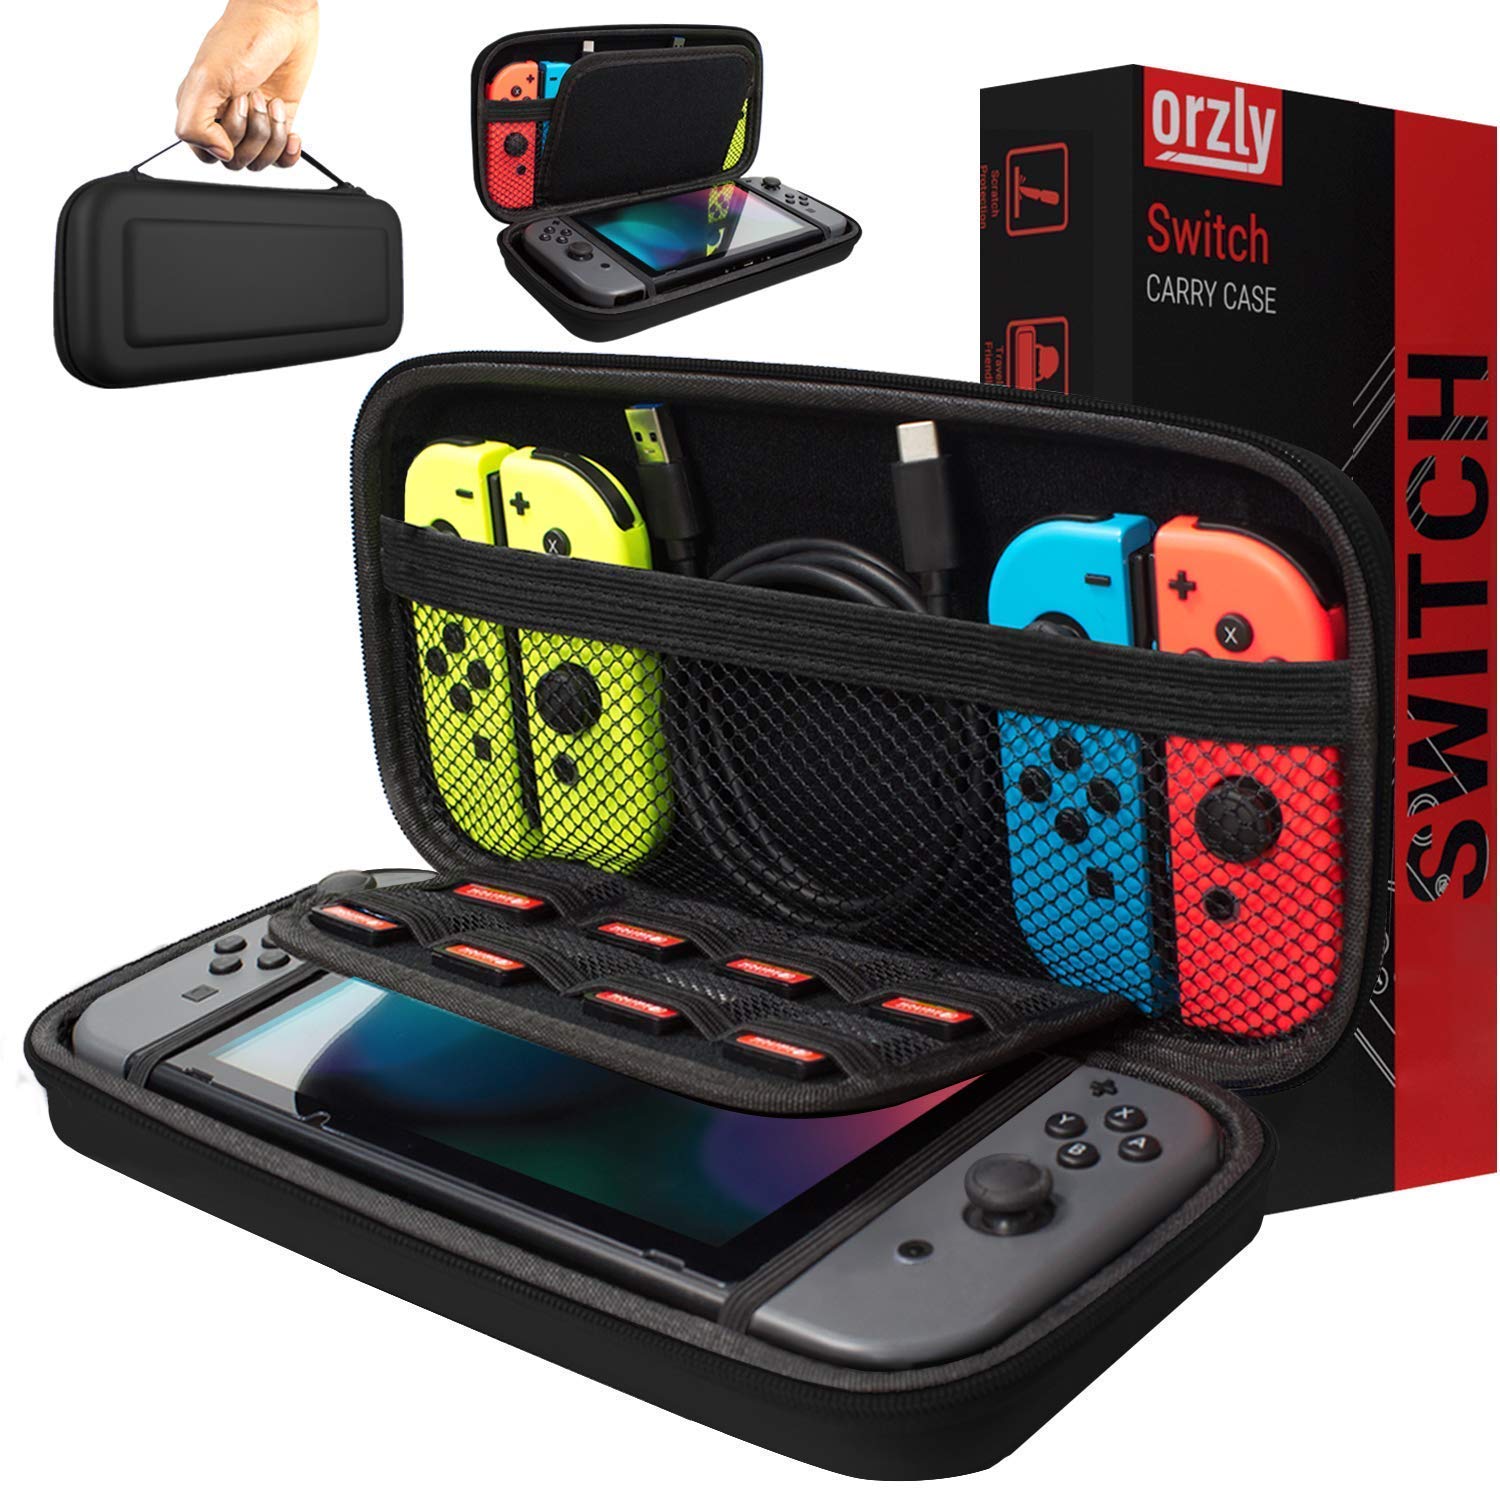 Orzly Carry Case Nintendo Switch